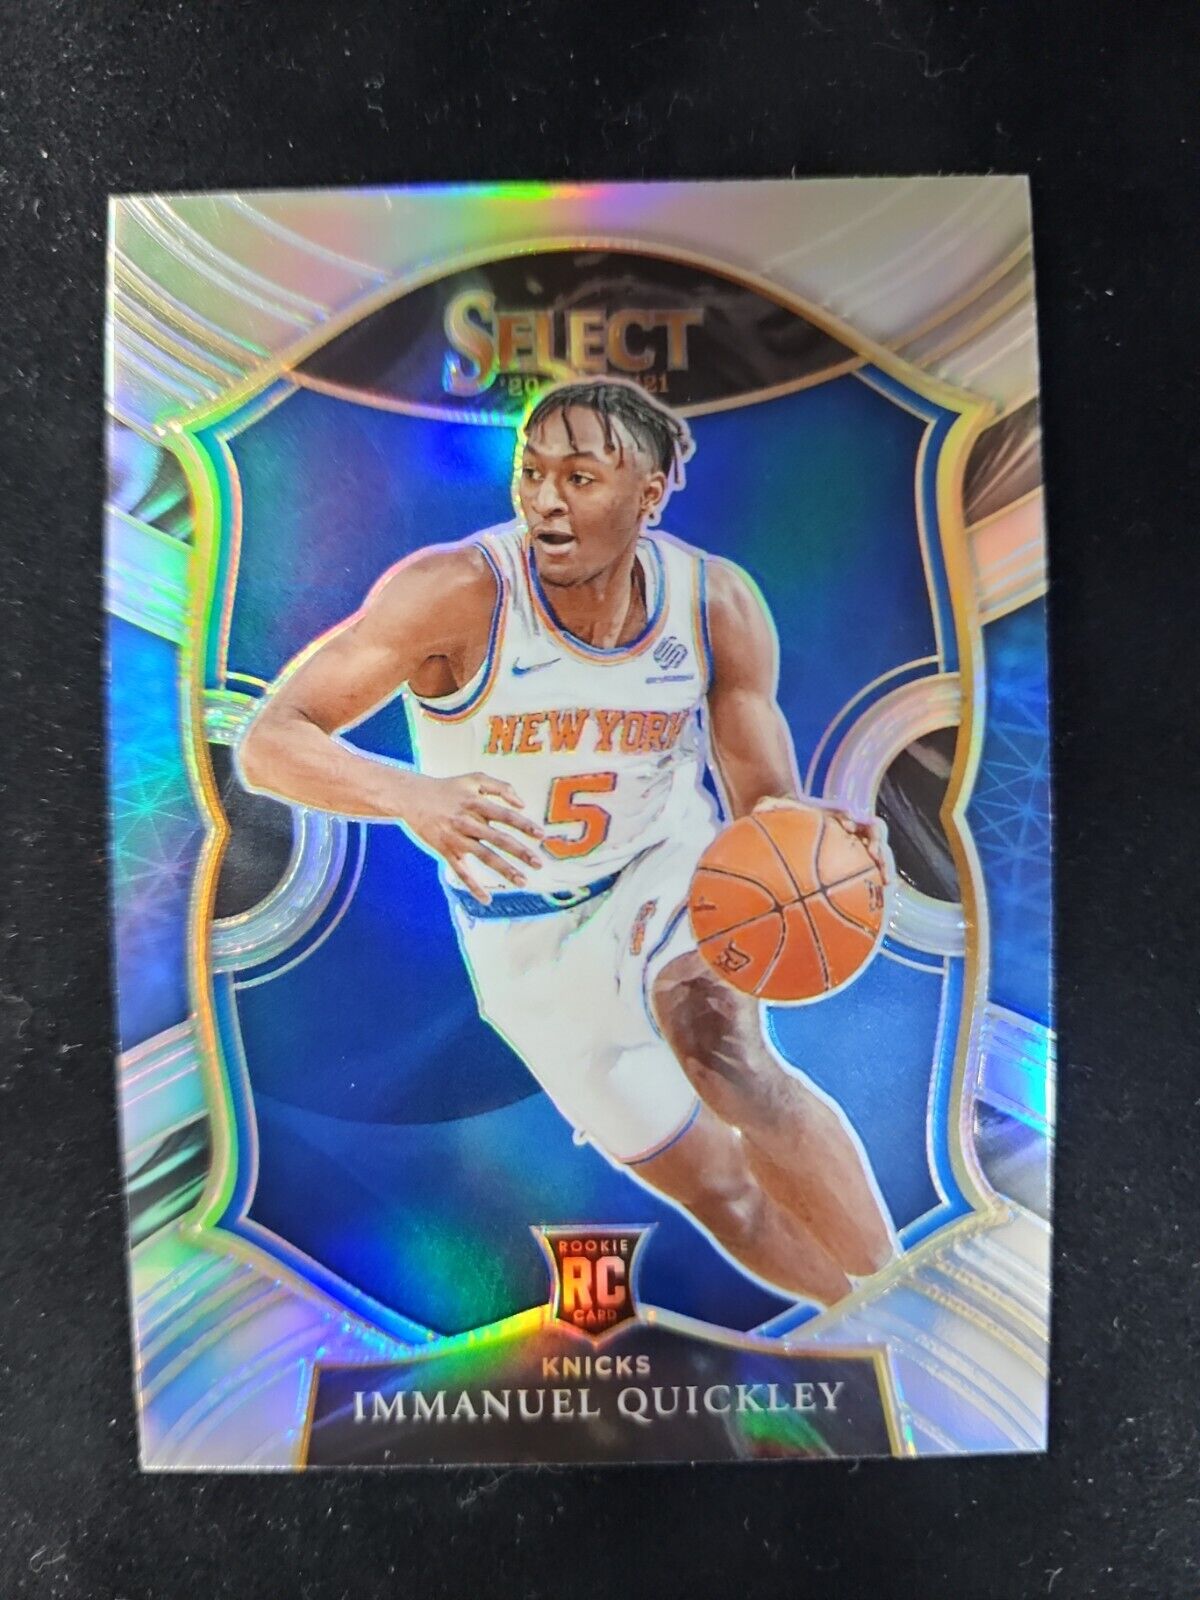 2020-21 Panini Select Immanuel Quickley Silver Prizm #85 Rookie RC Knicks